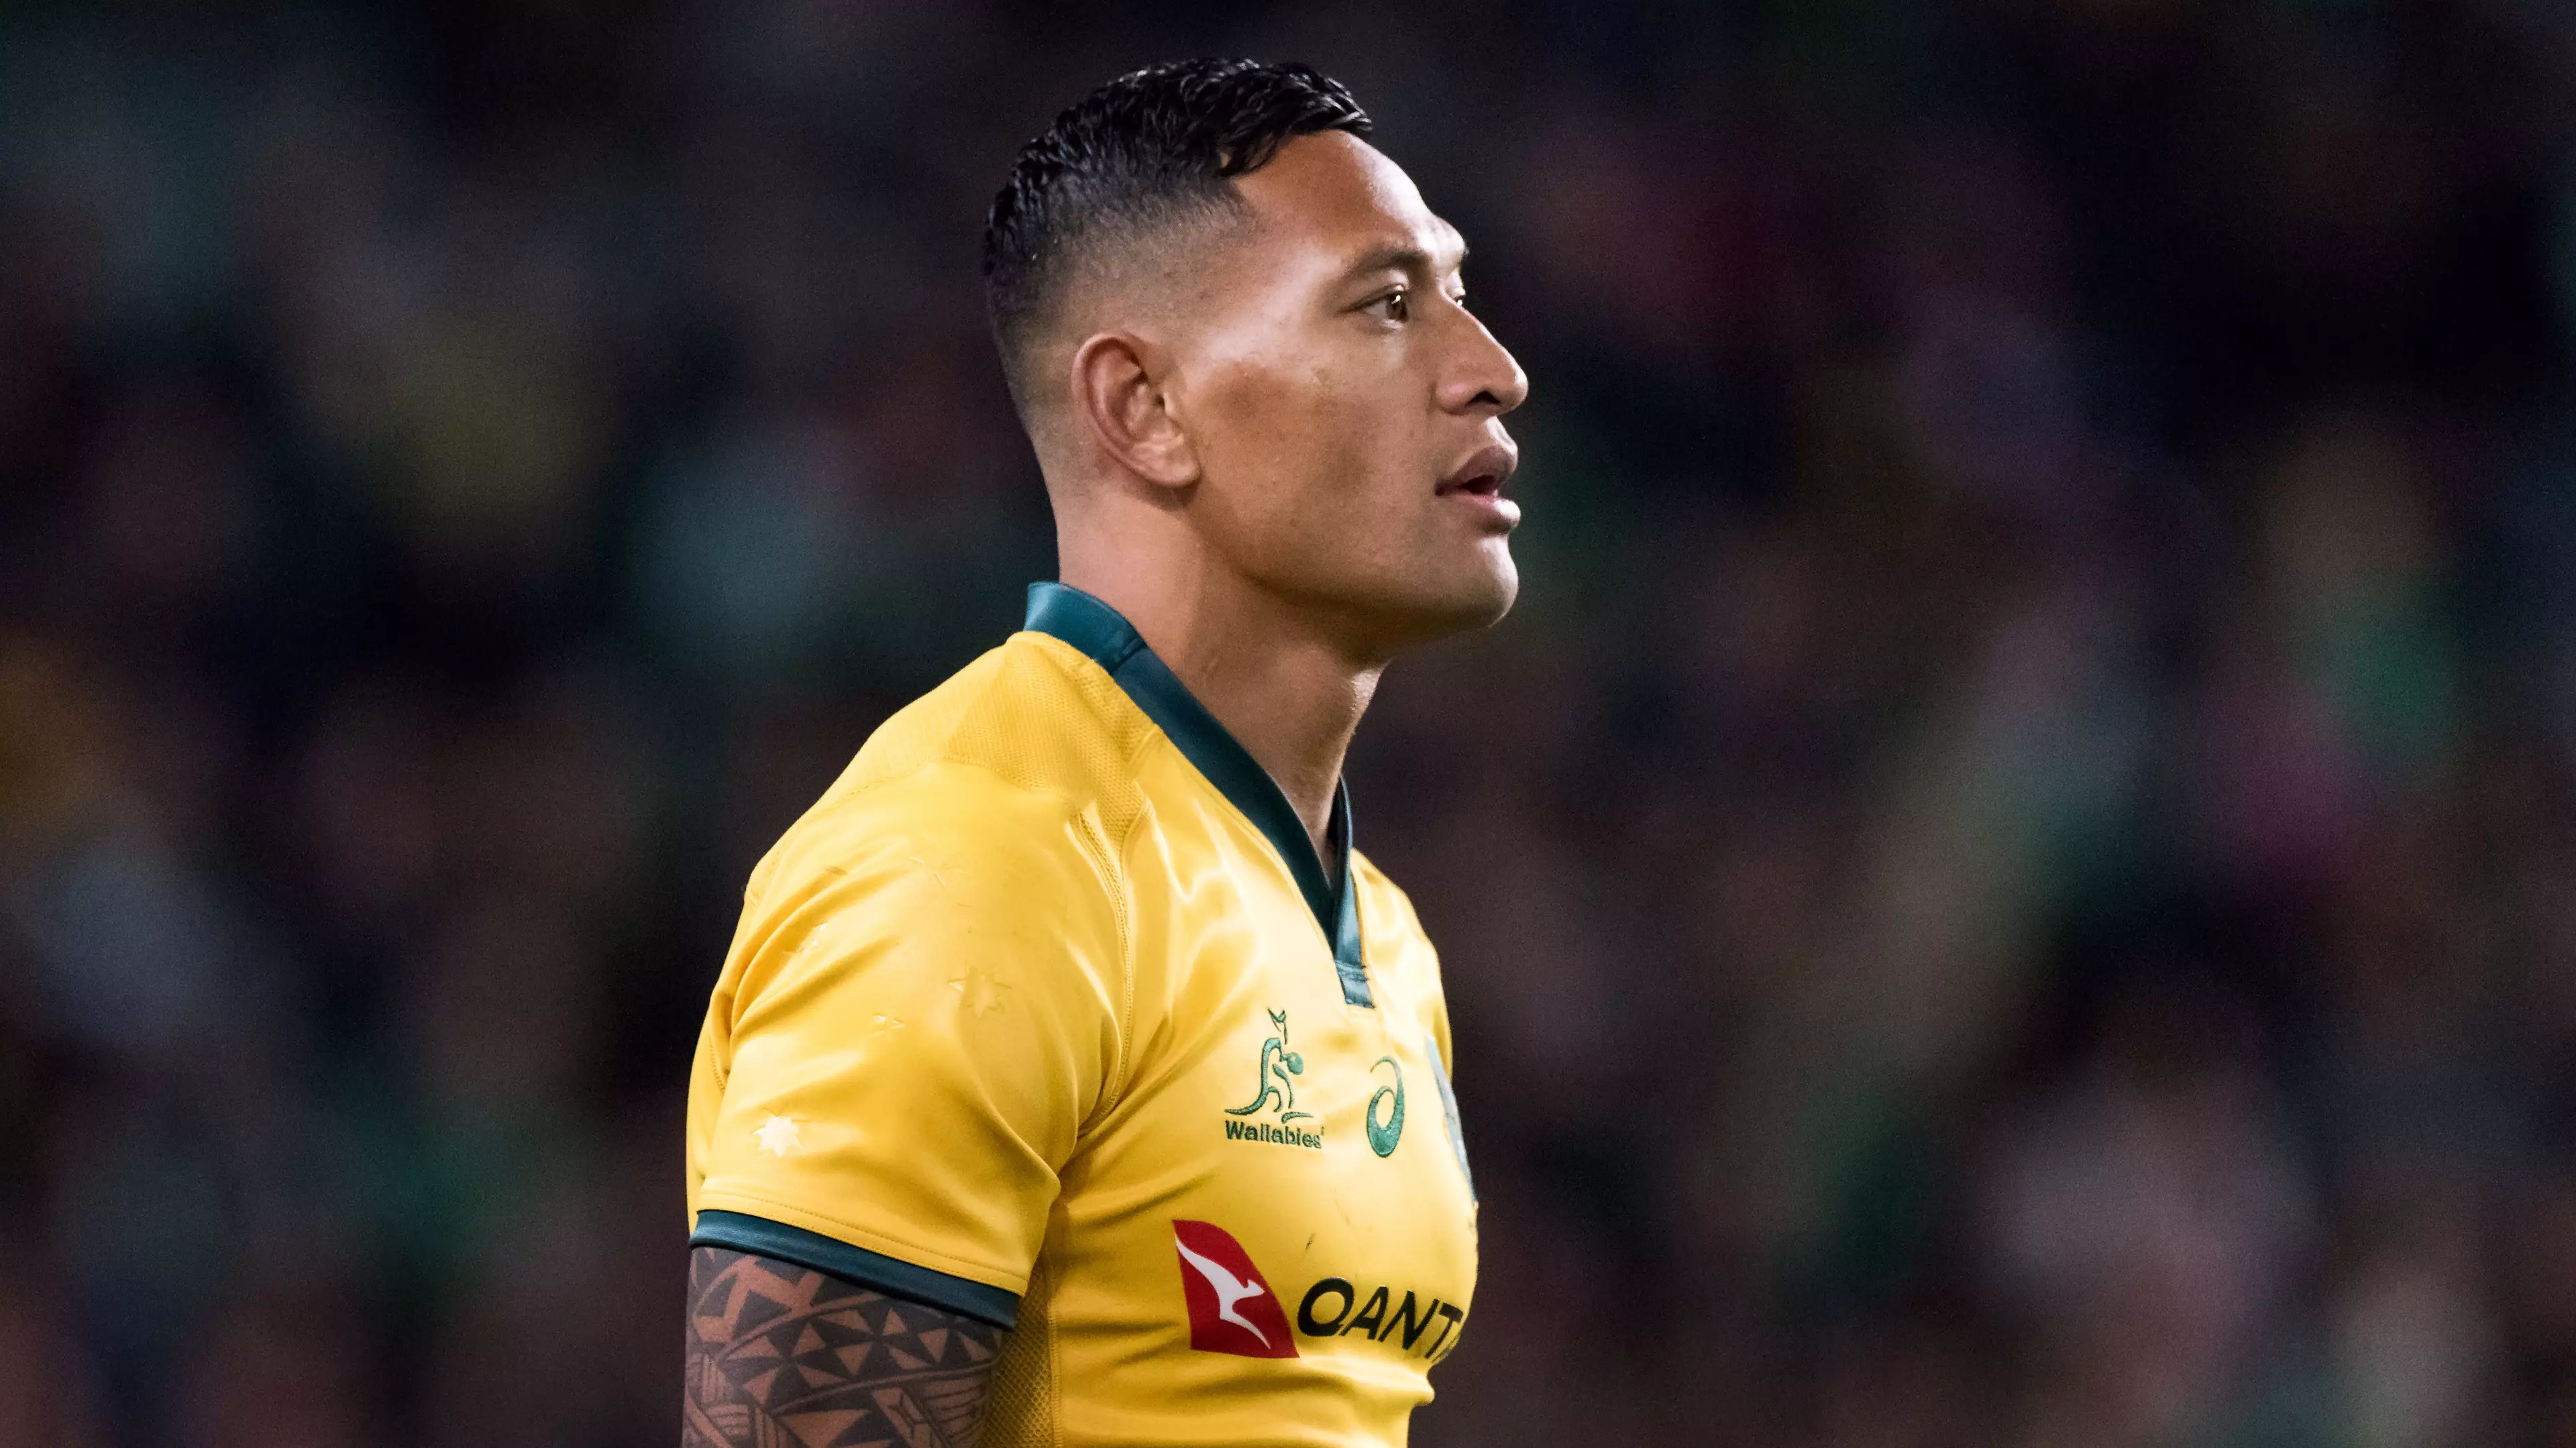 Israel Folau Found Guilty Of Breaching Code Of Conduct By Rugby Australia